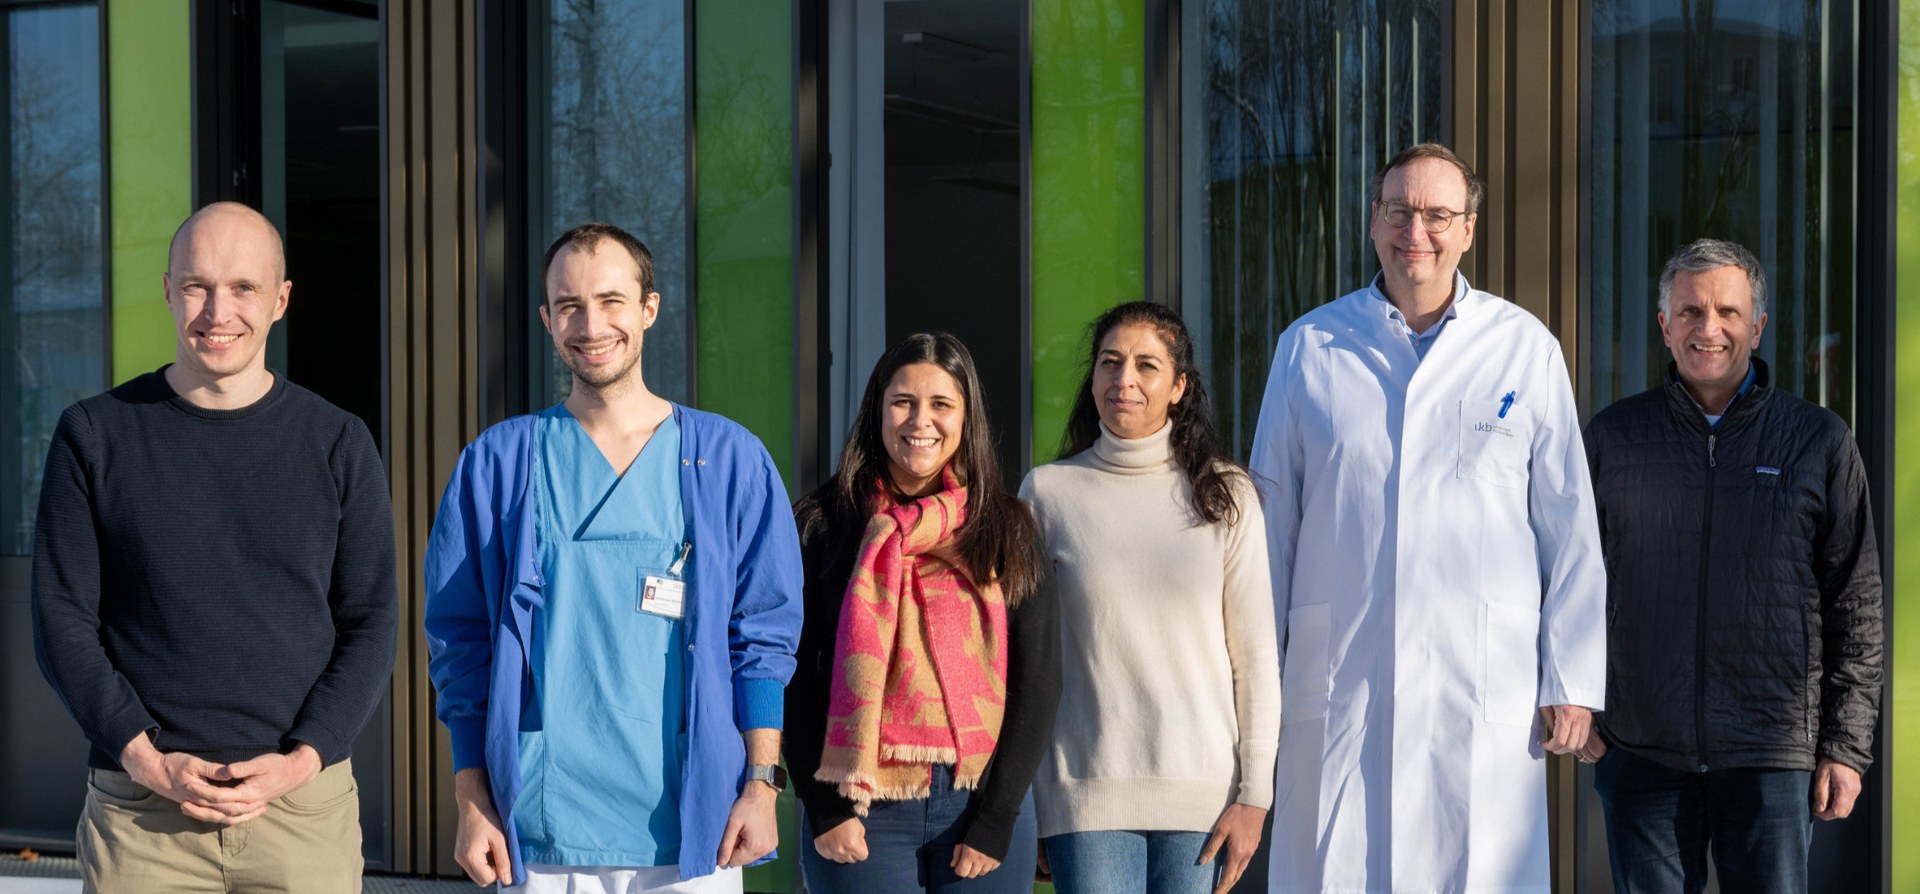 Bonn researchers gain completely new insights into kidney diseases thanks to automated image analysis: - (from left) Prof. Alexander Effland, Dr. Alexander Böhner, Alice Jacob, Prof. Zeinab Abdullah, Prof. Christian Kurts and Prof. Martin Rumpf.